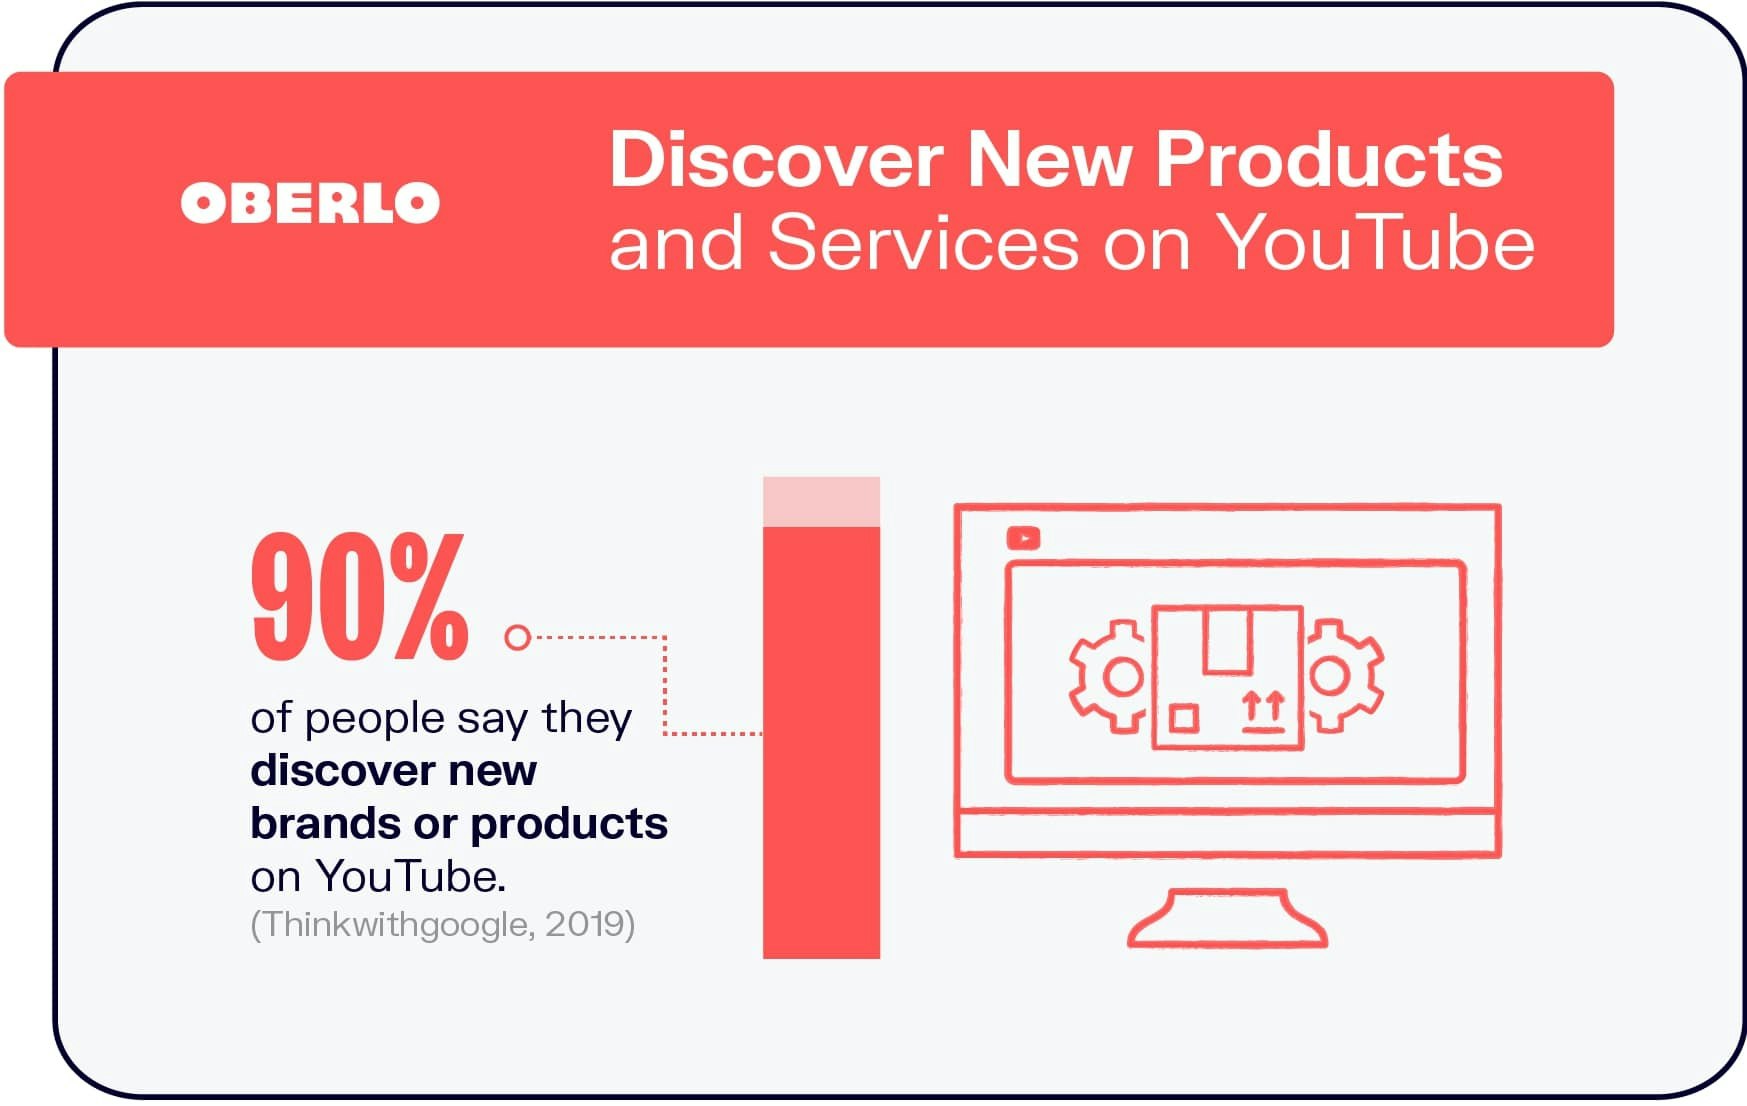 People Discover New Products on YouTube